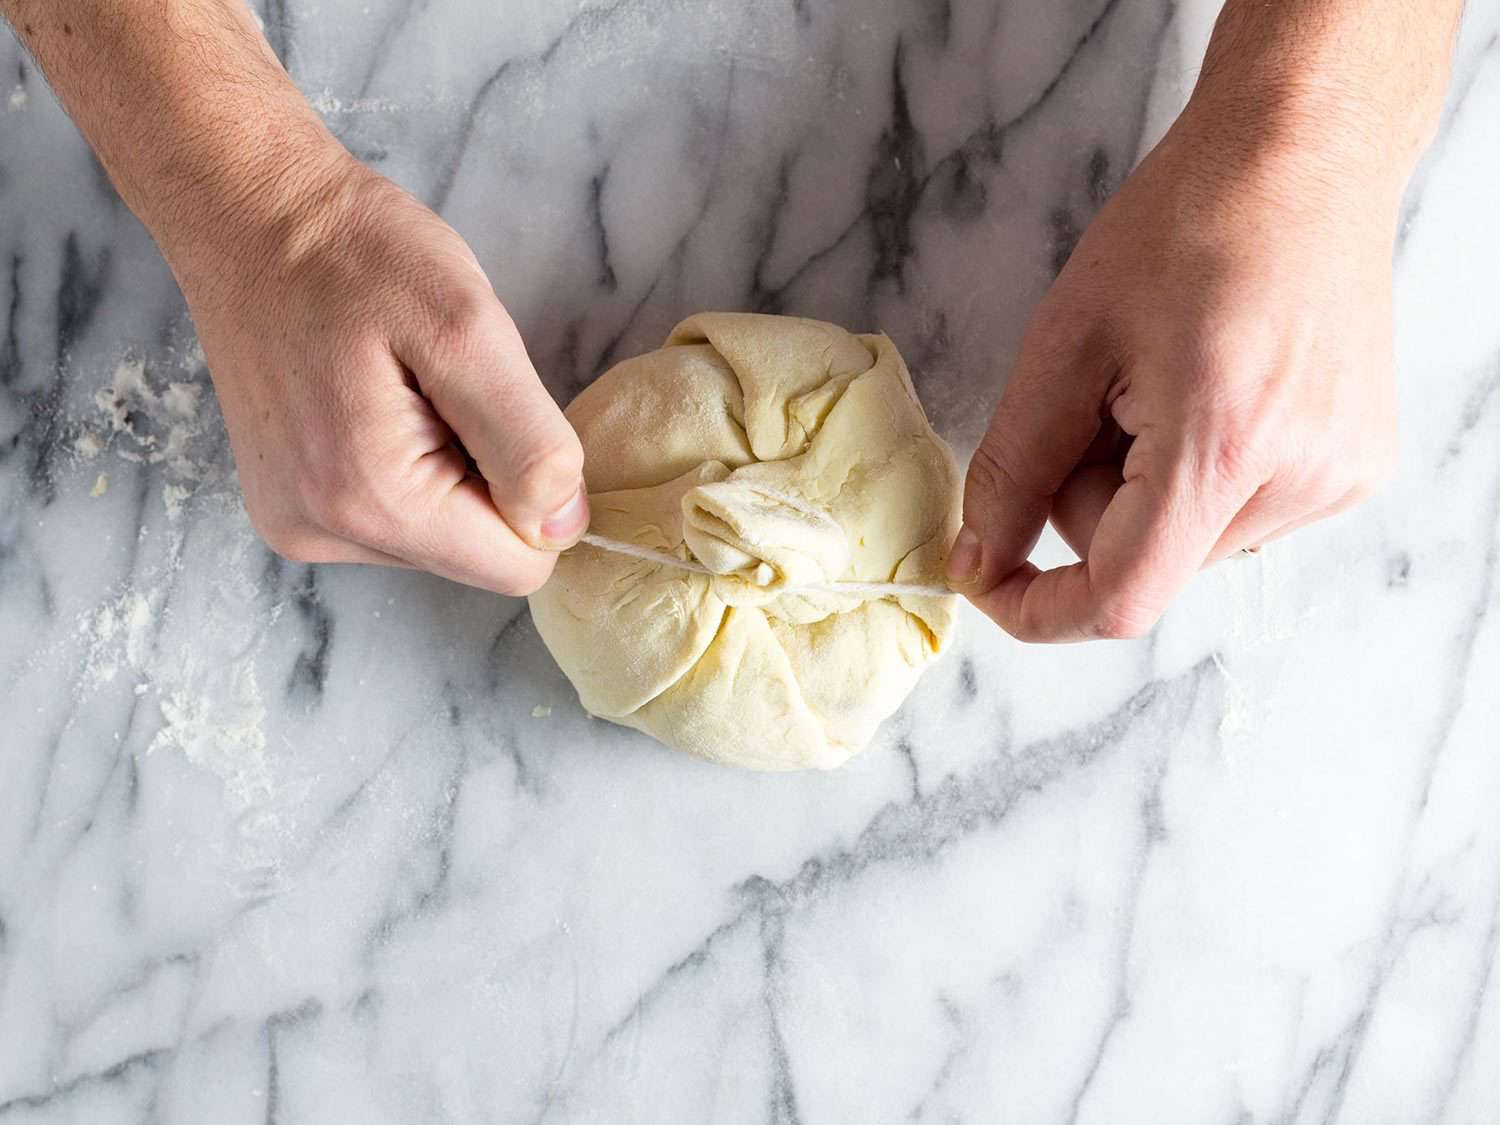 Tying a parcel of puff pastry around baked brie.